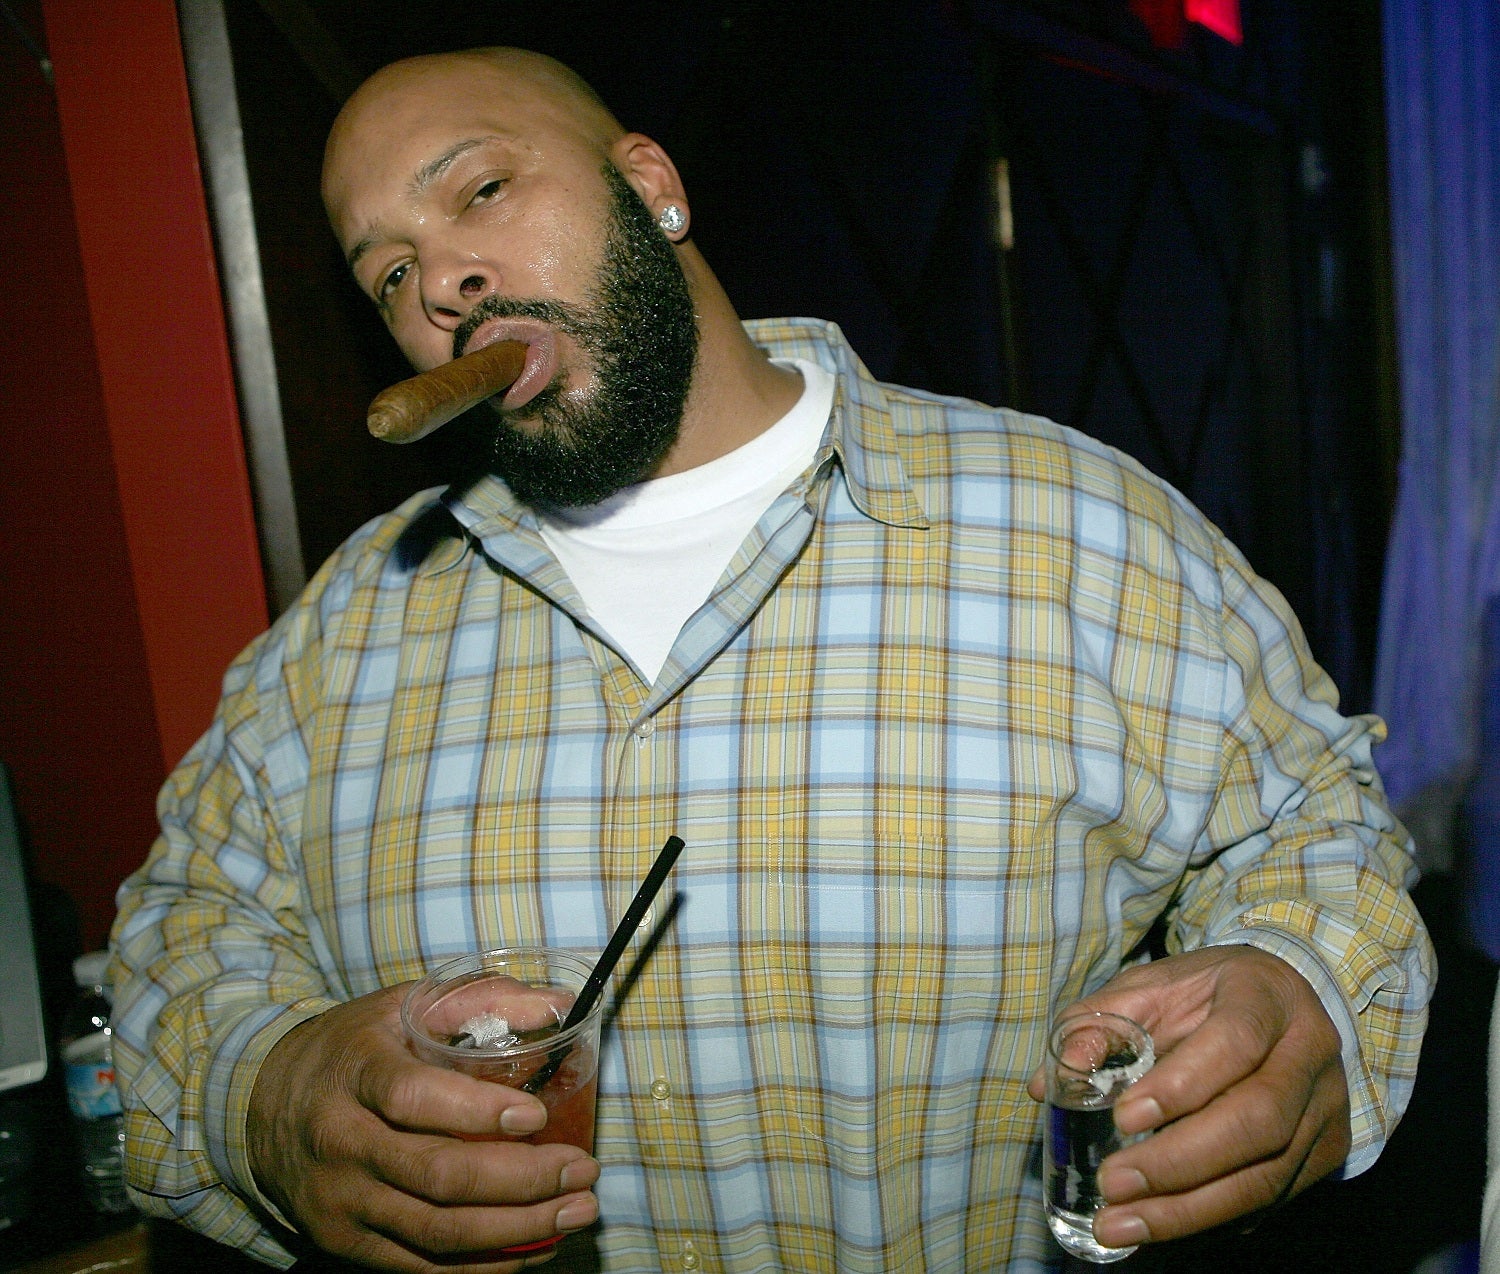 Suge Knight faces murder charges after being linked with a hit-and-run